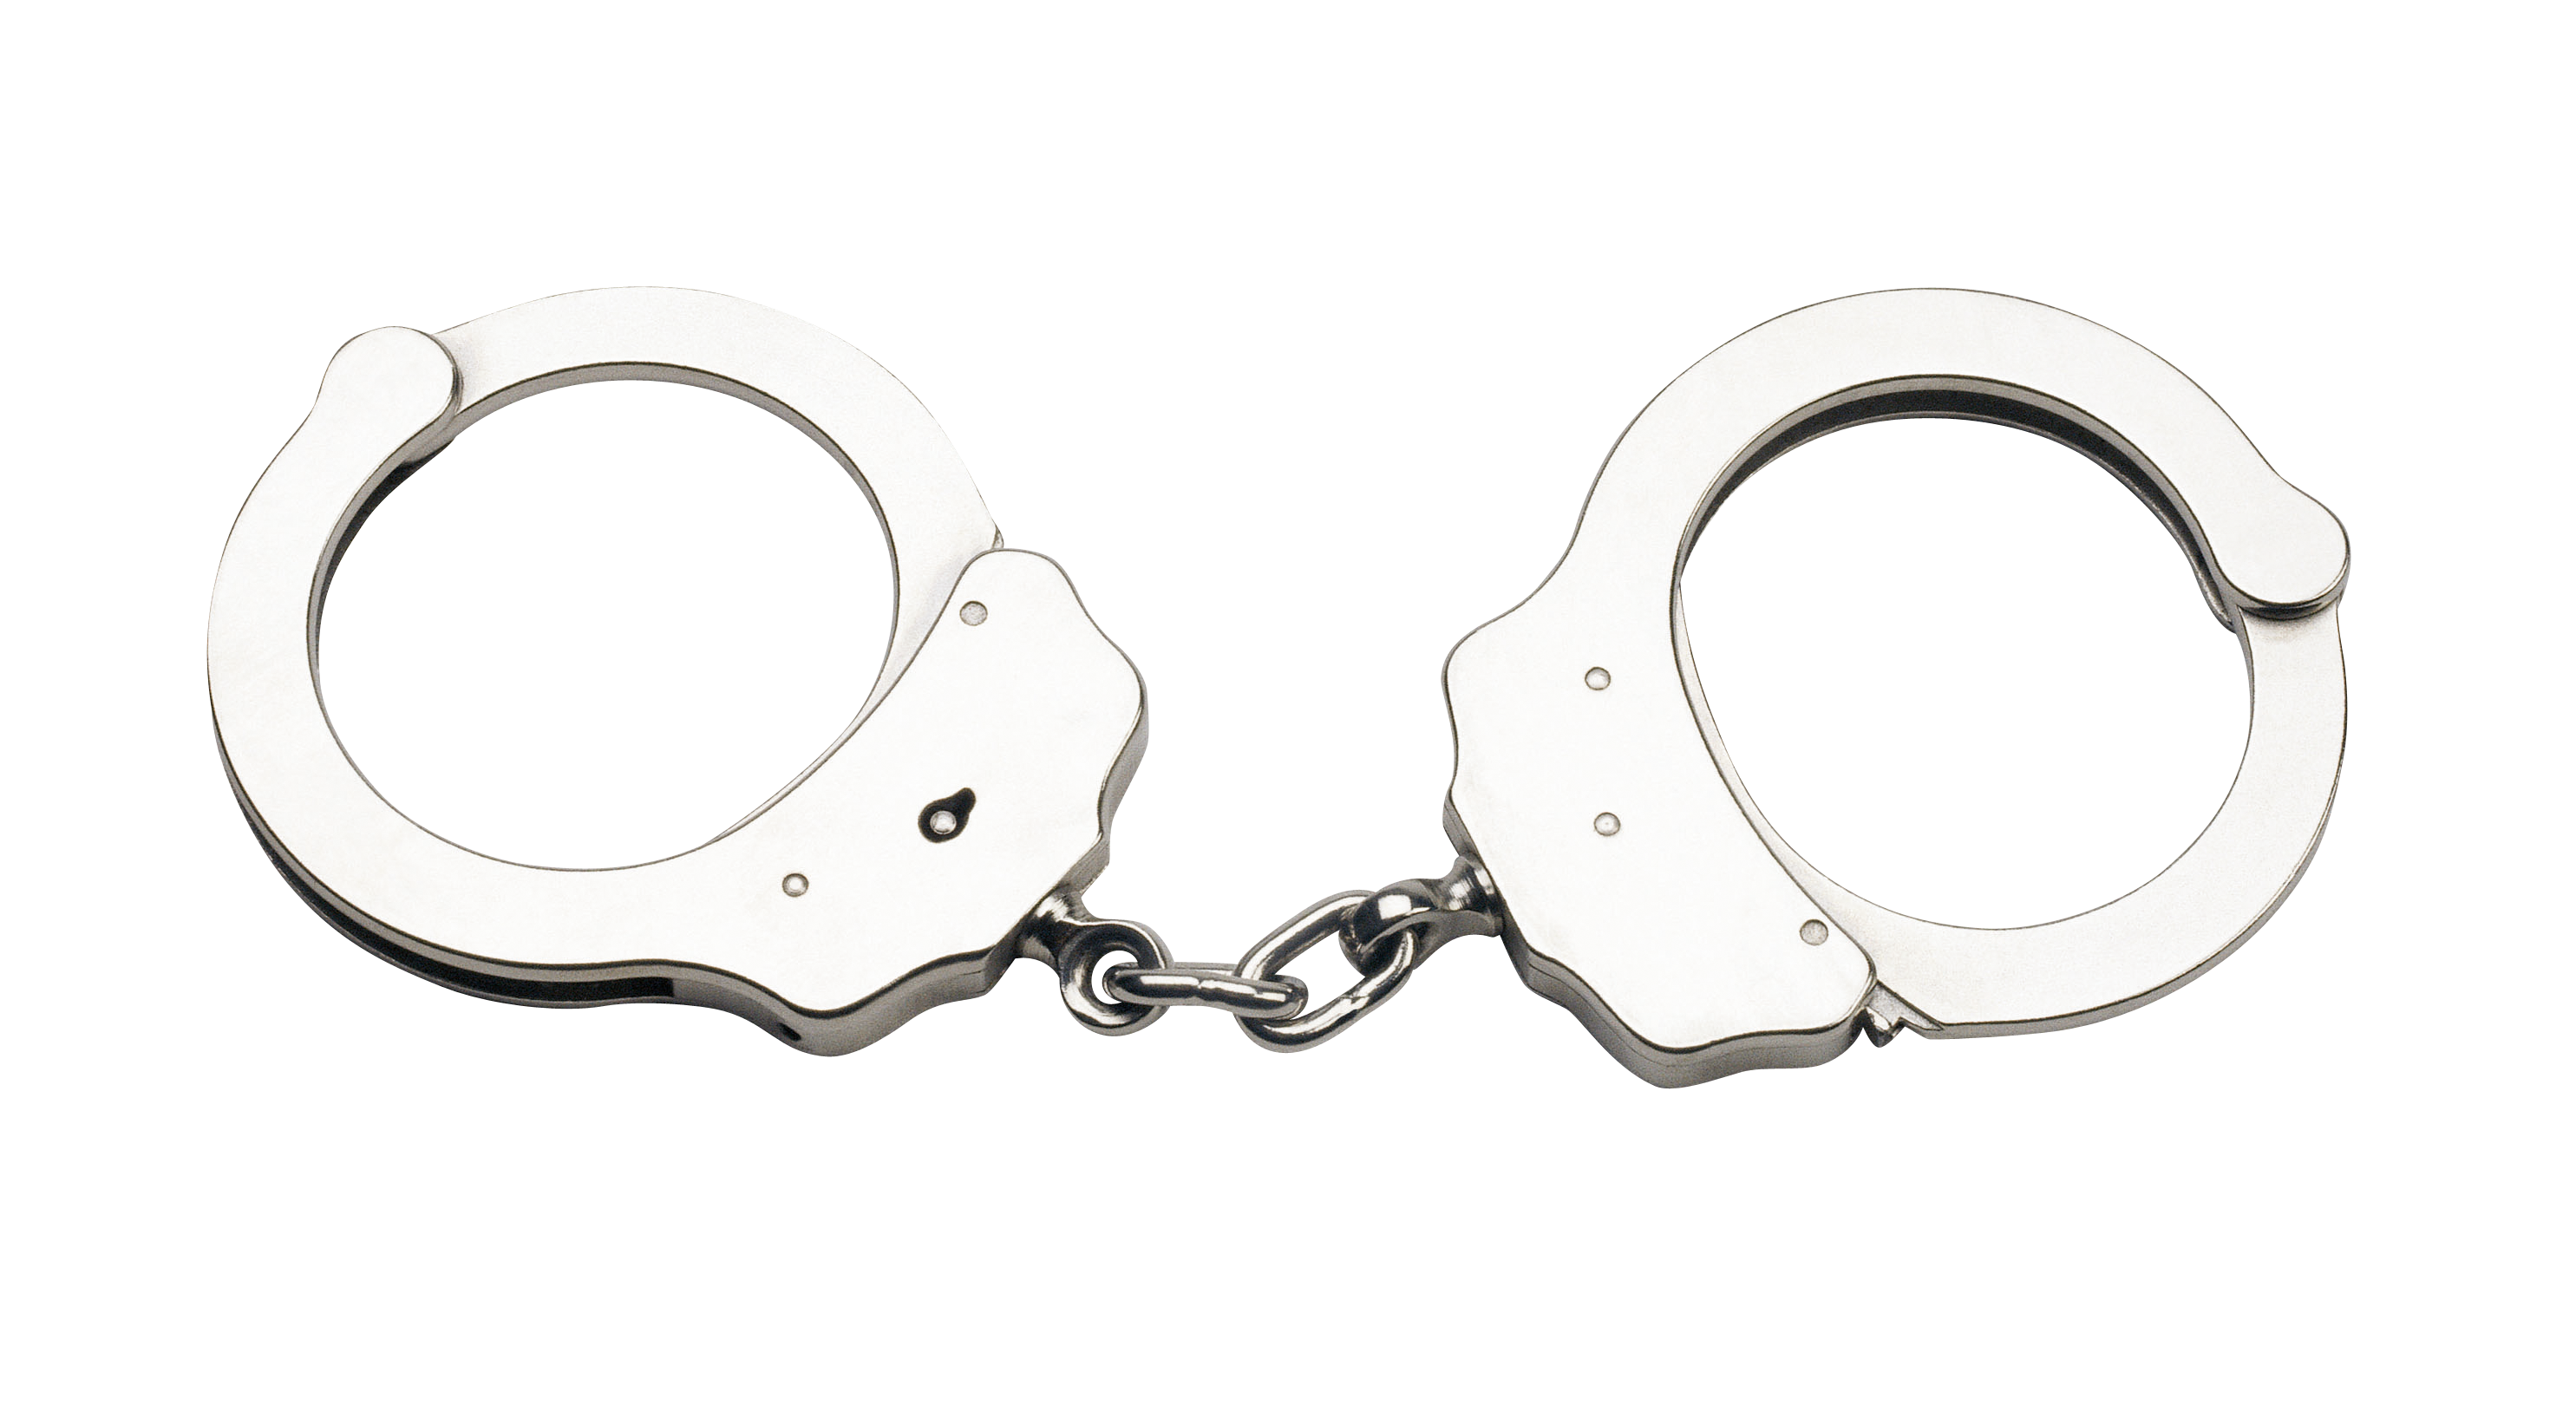 Handcuffs Transparent Png By Absurdwordpreferred